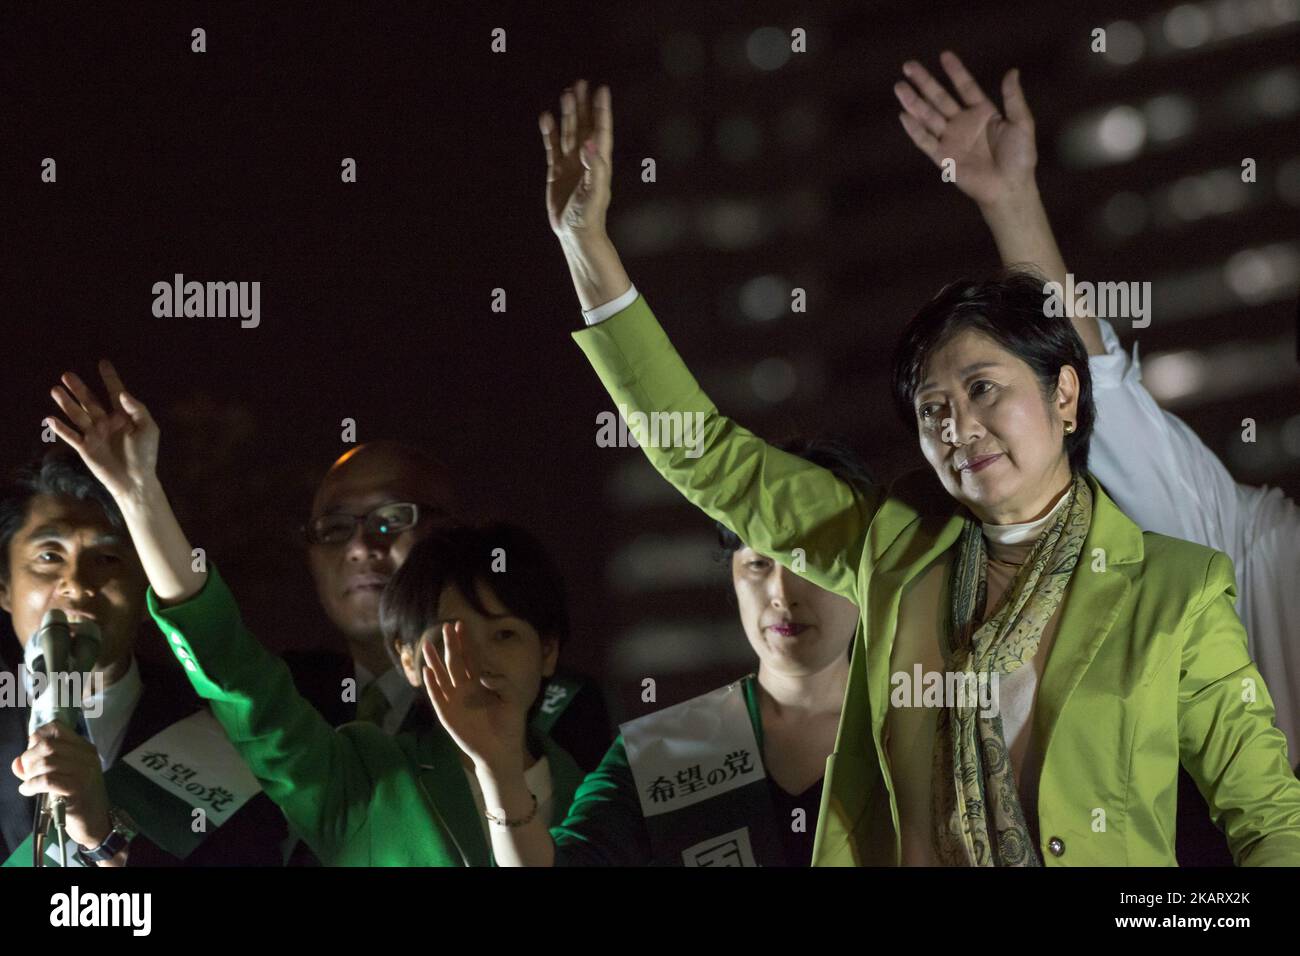 Tokyo Governor and Kibo no To (Party of Hope) leader Yuriko Koike raise their hands to react audience during his political rally in Yokohama, Japan, October 12, 2017. The general election vote will be held on October 22, 2017. Prime Minister Shinzo Abe’s ruling LDP is expecting to win the October 22 general election while Koike's party is lagging behind, according to a survey. (Photo by Alessandro Di Ciommo/NurPhoto) Stock Photo